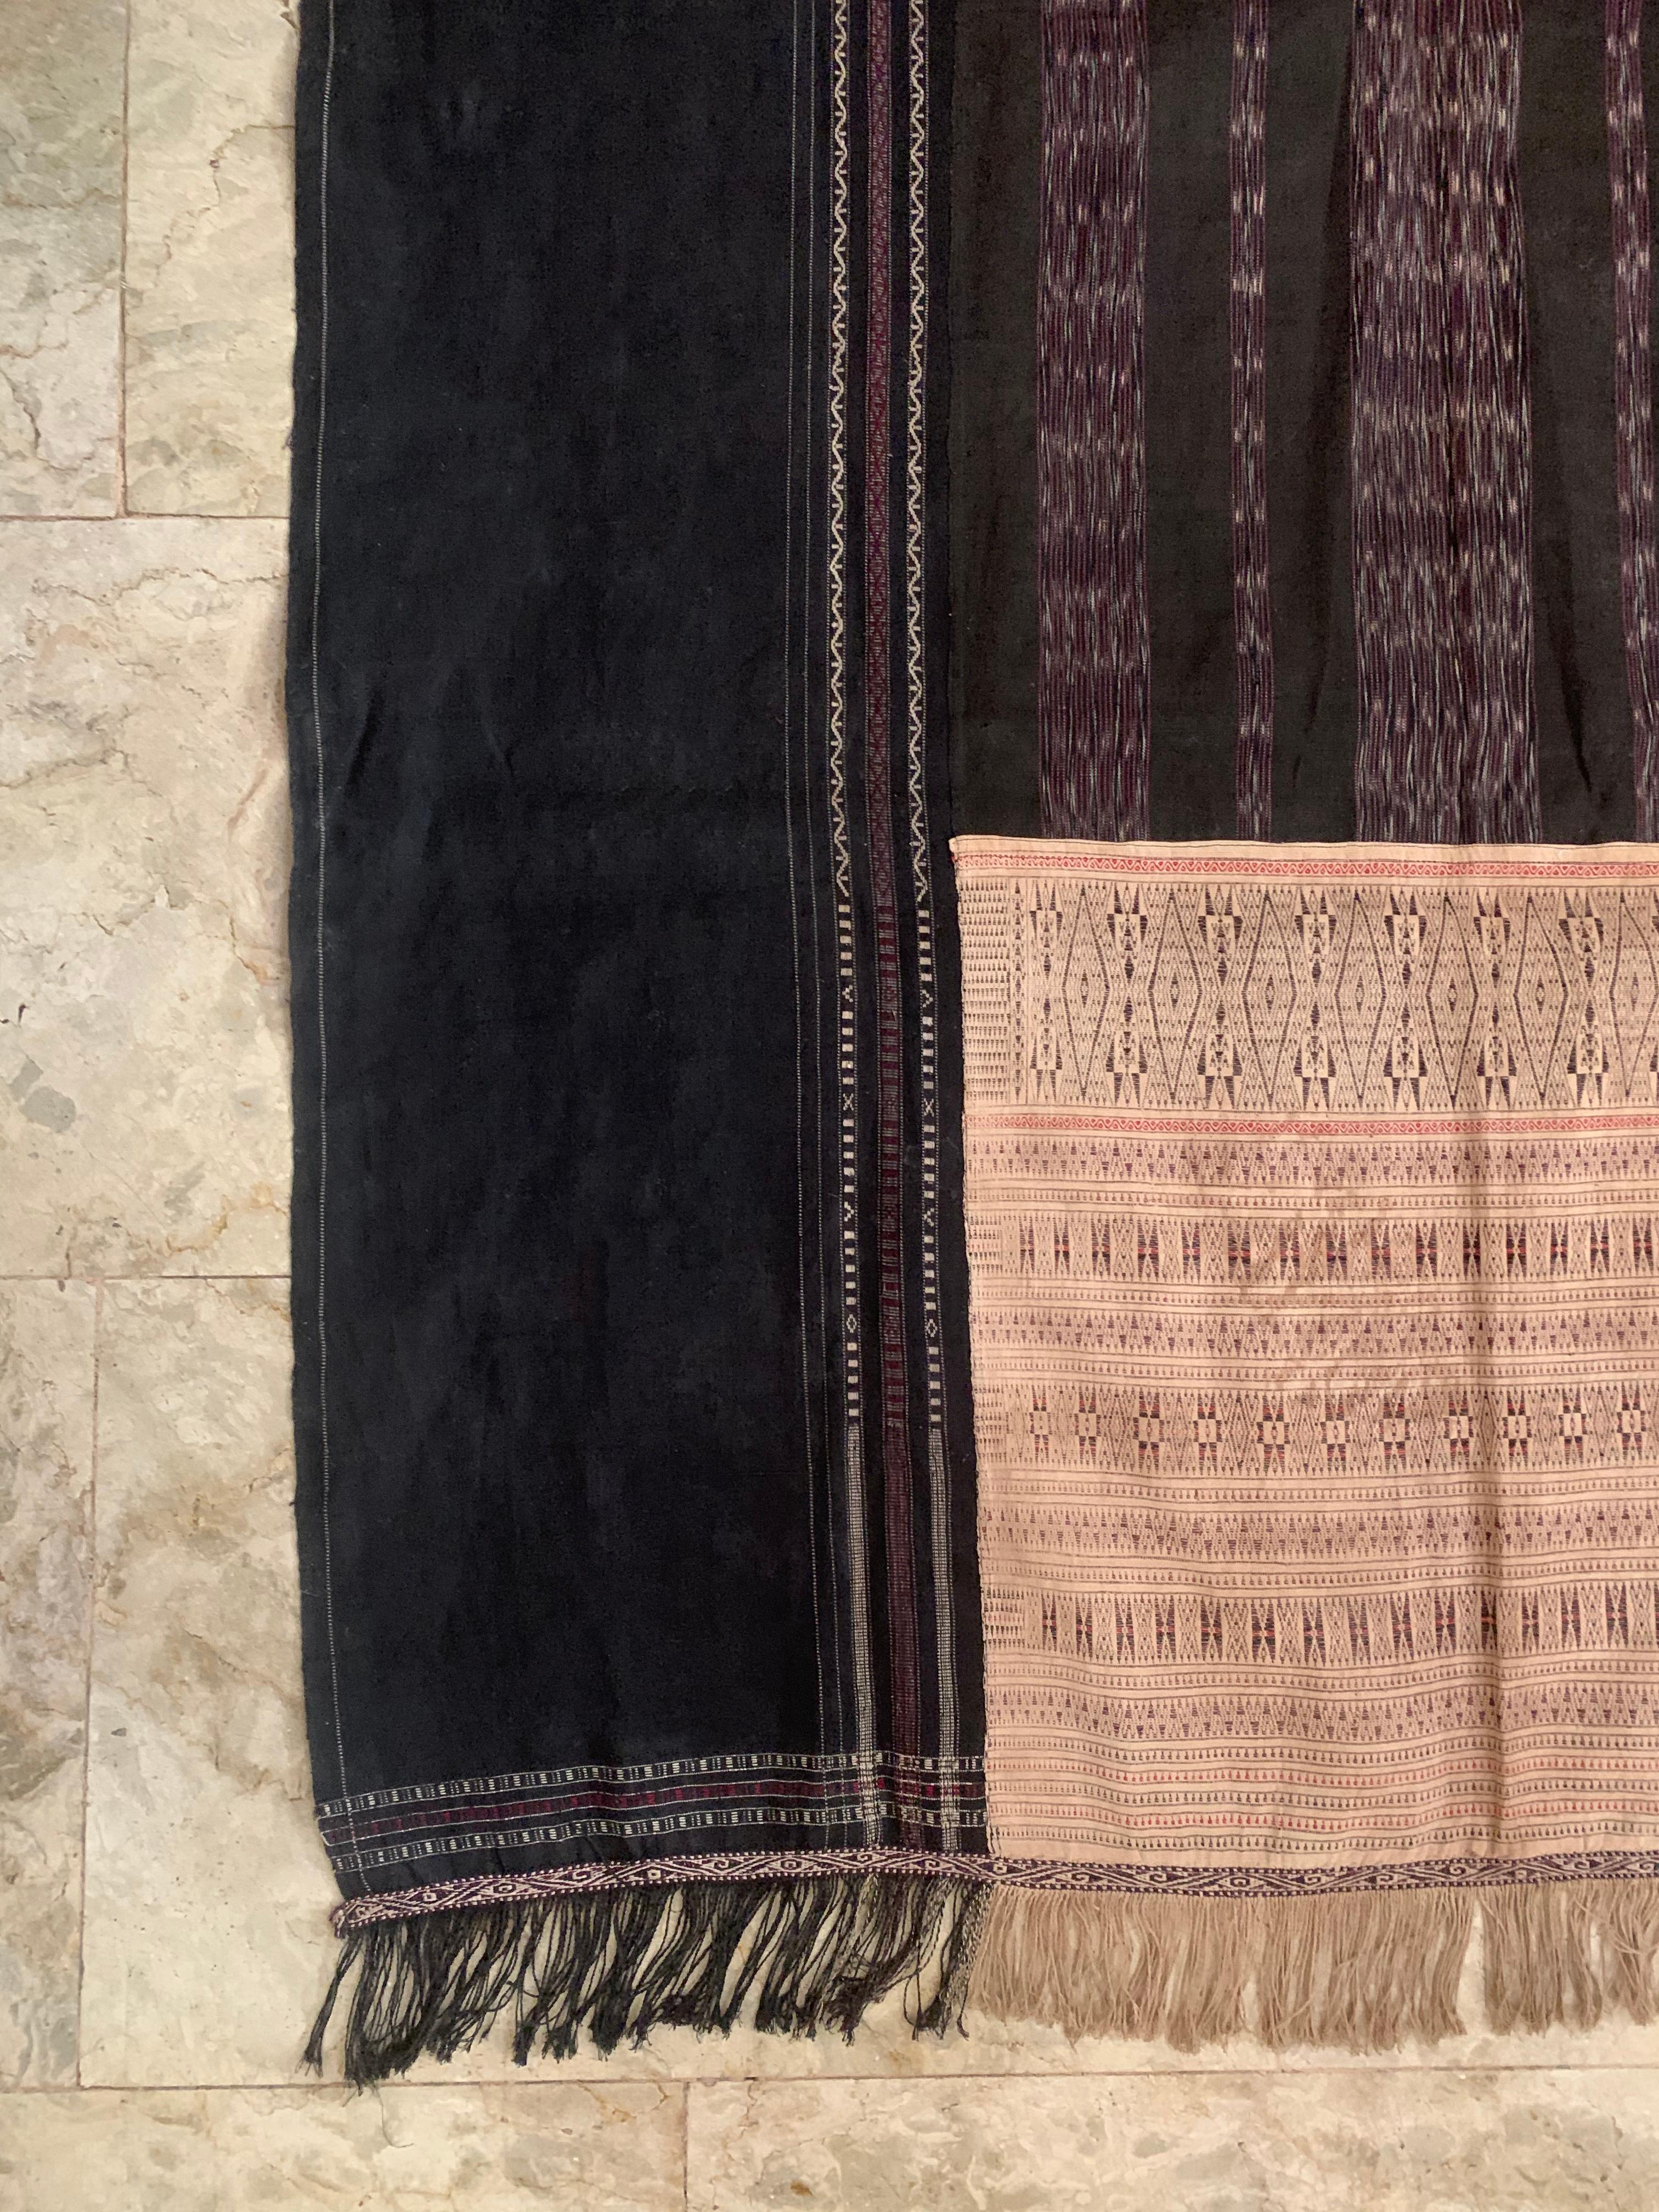 Early 20th Century Ikat Textile 